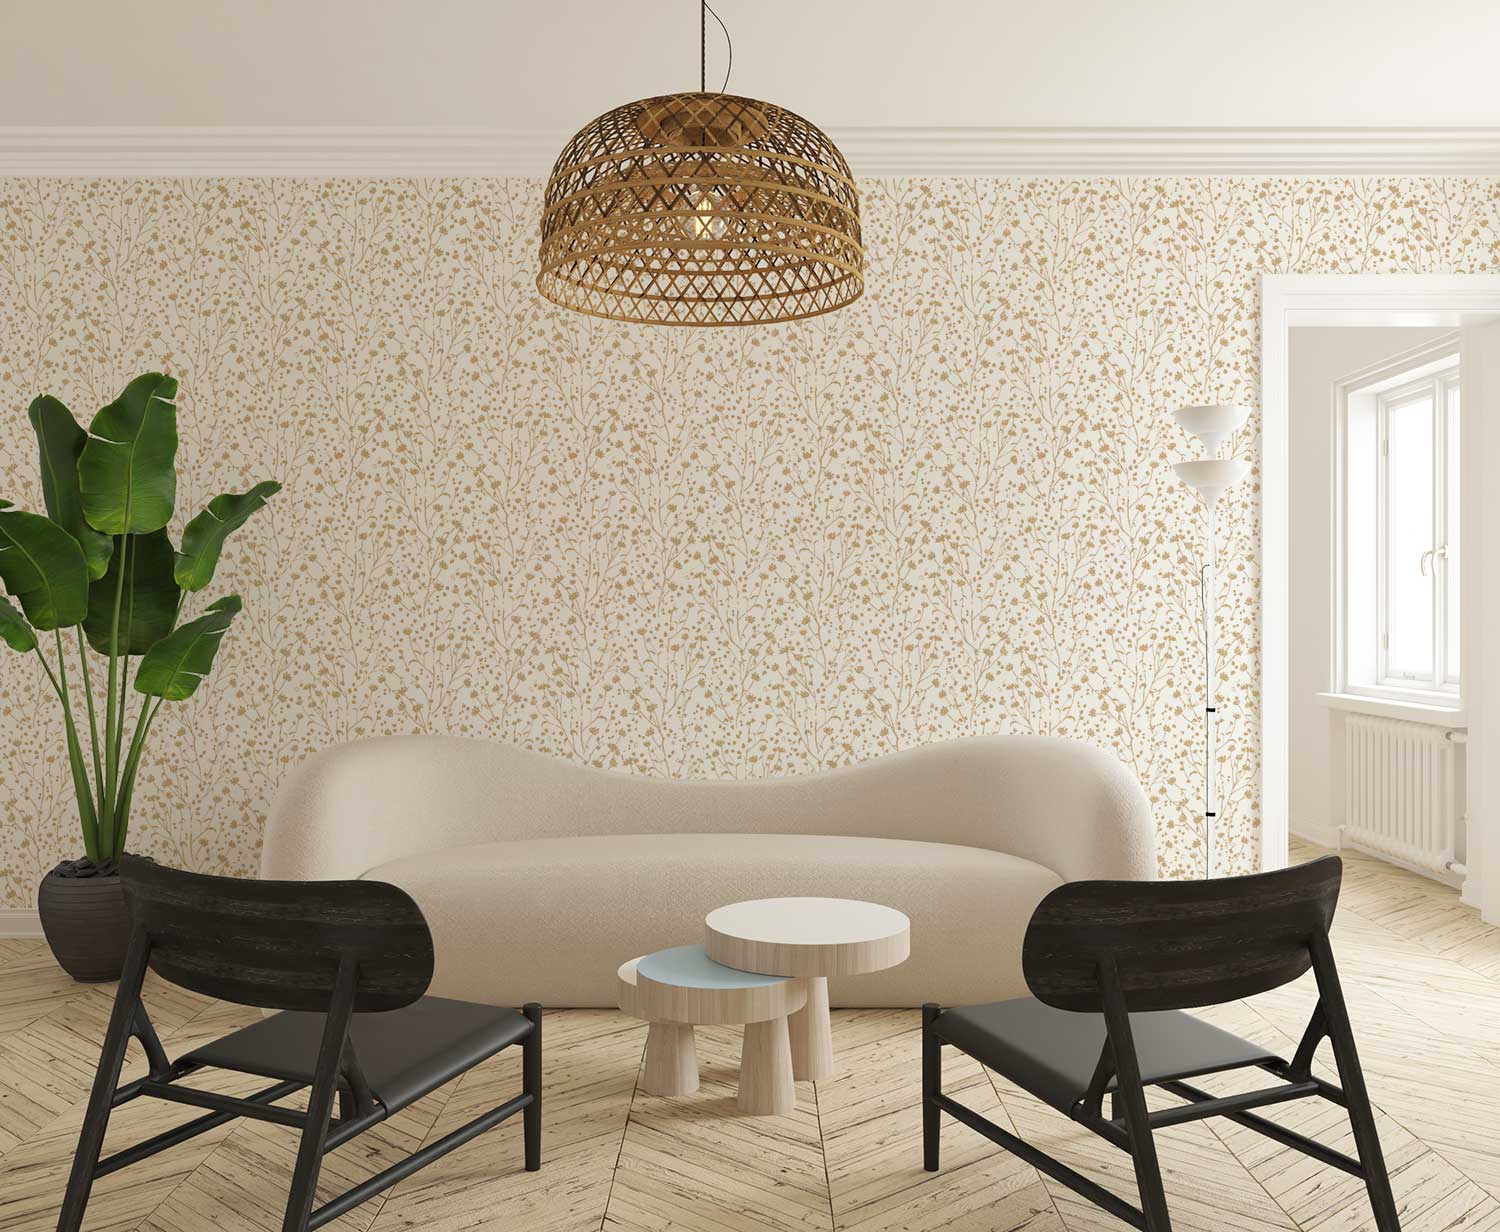 Blossoms Wallpaper in Ochre behind a modern white sofa with two black wood chairs